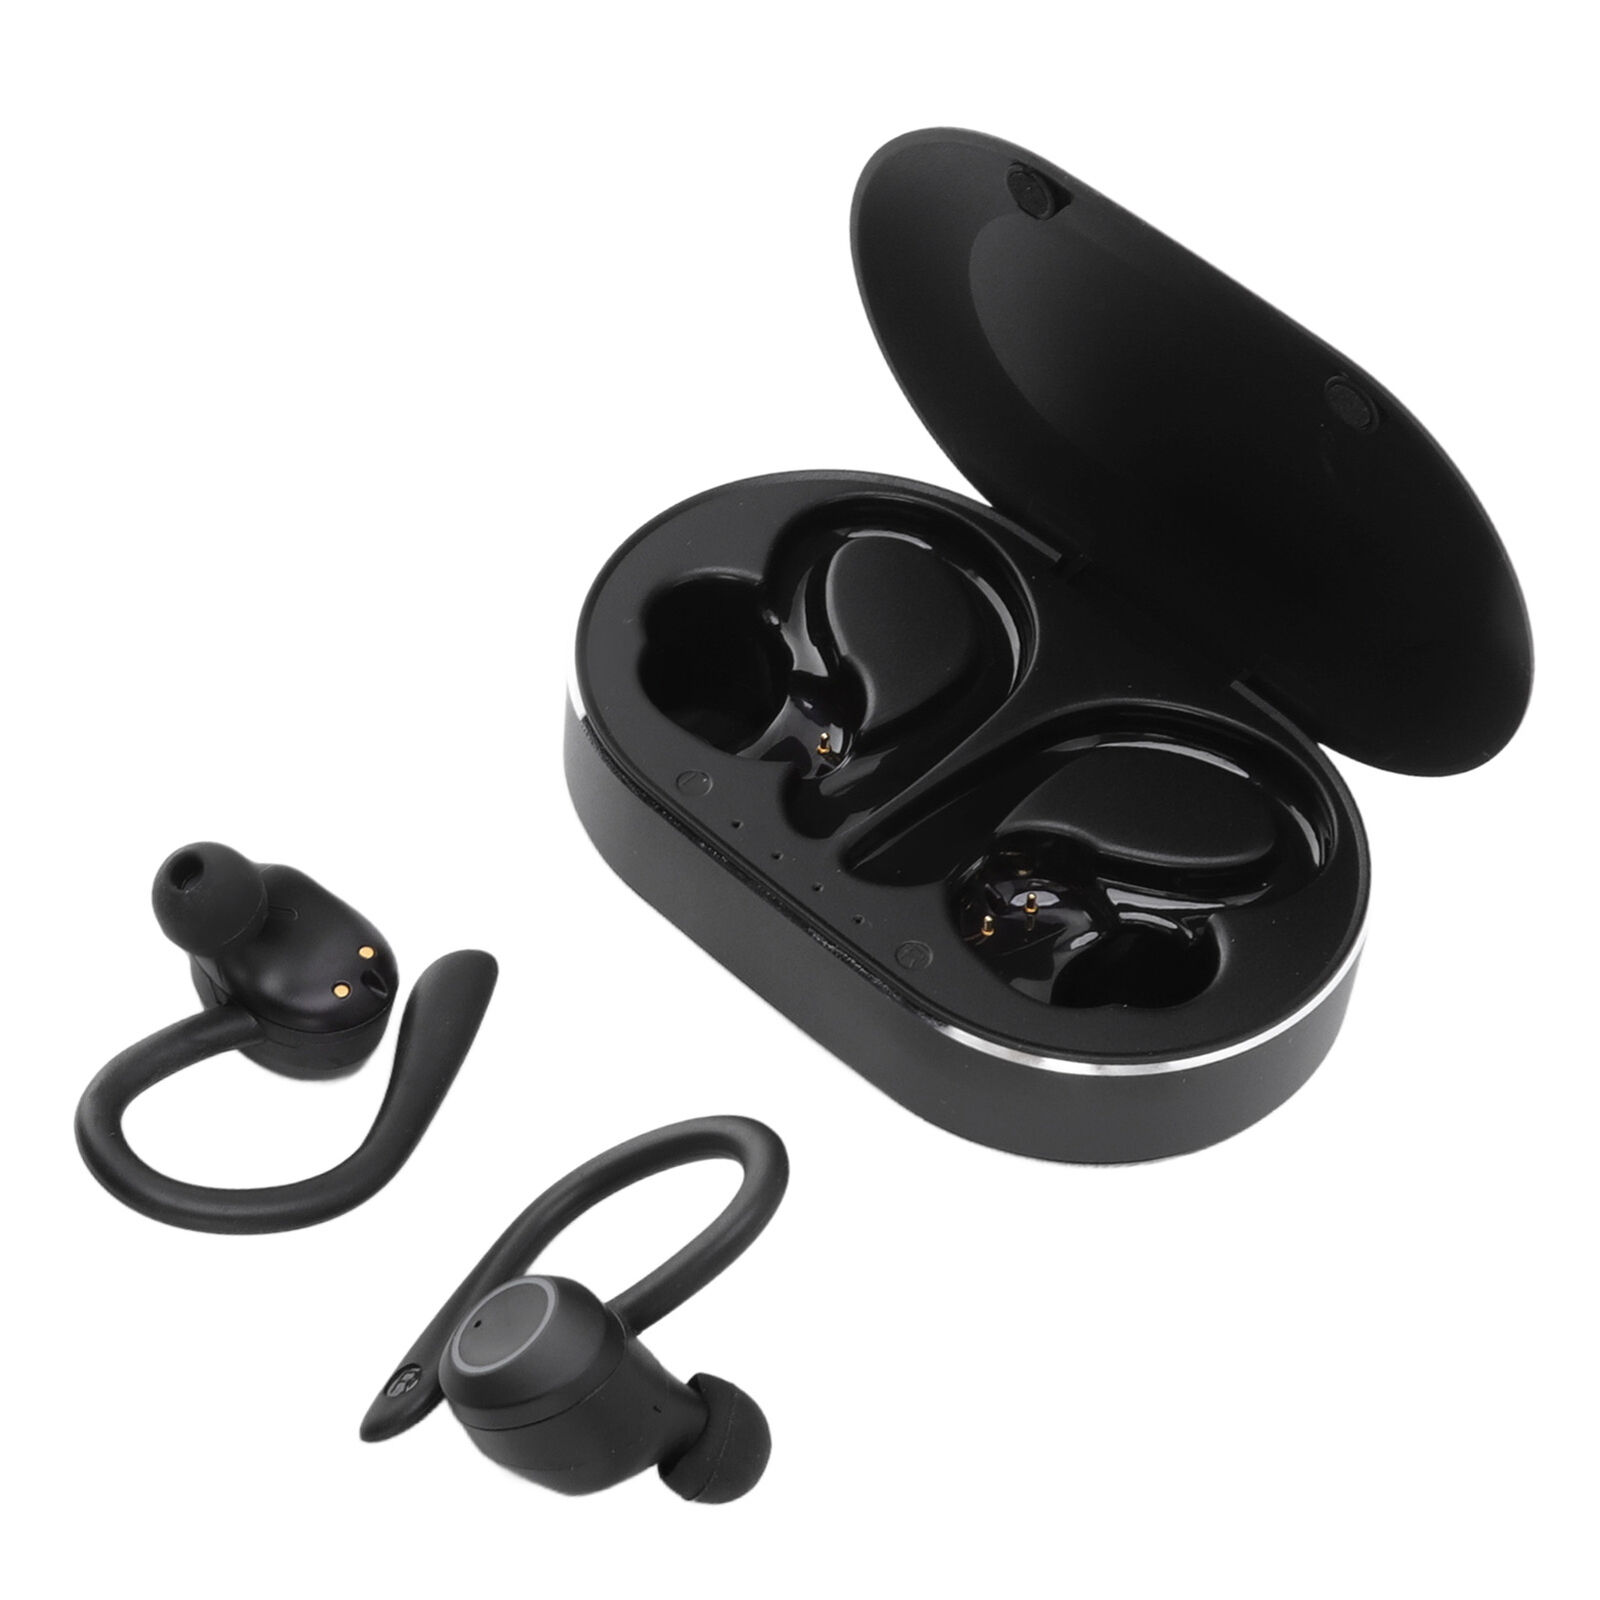 connecting-your-wireless-earbuds-a-quick-guide